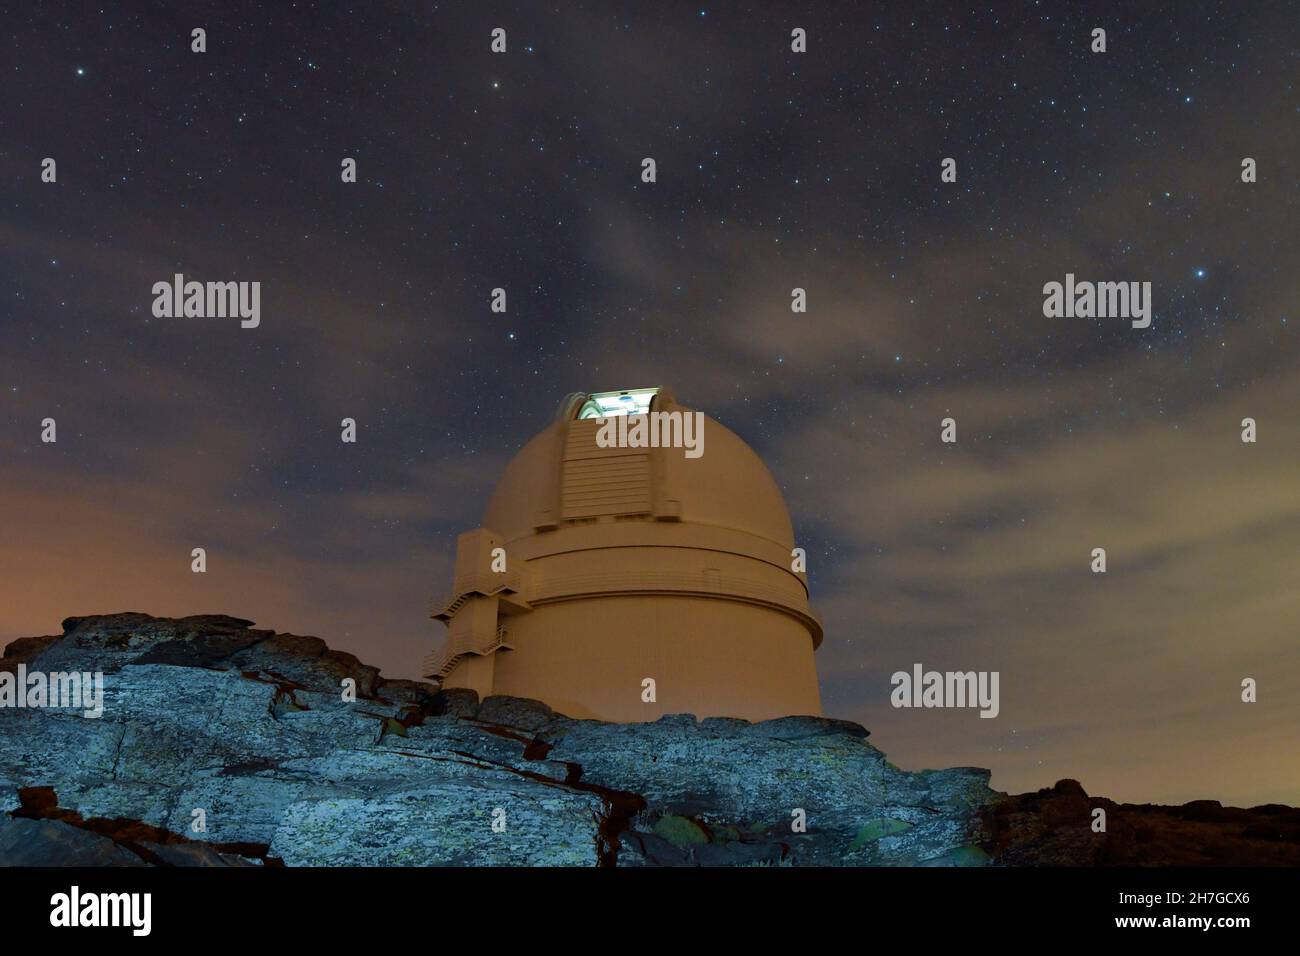 Night photography at the Calar Alto observatory in Almeria. Stock Photo